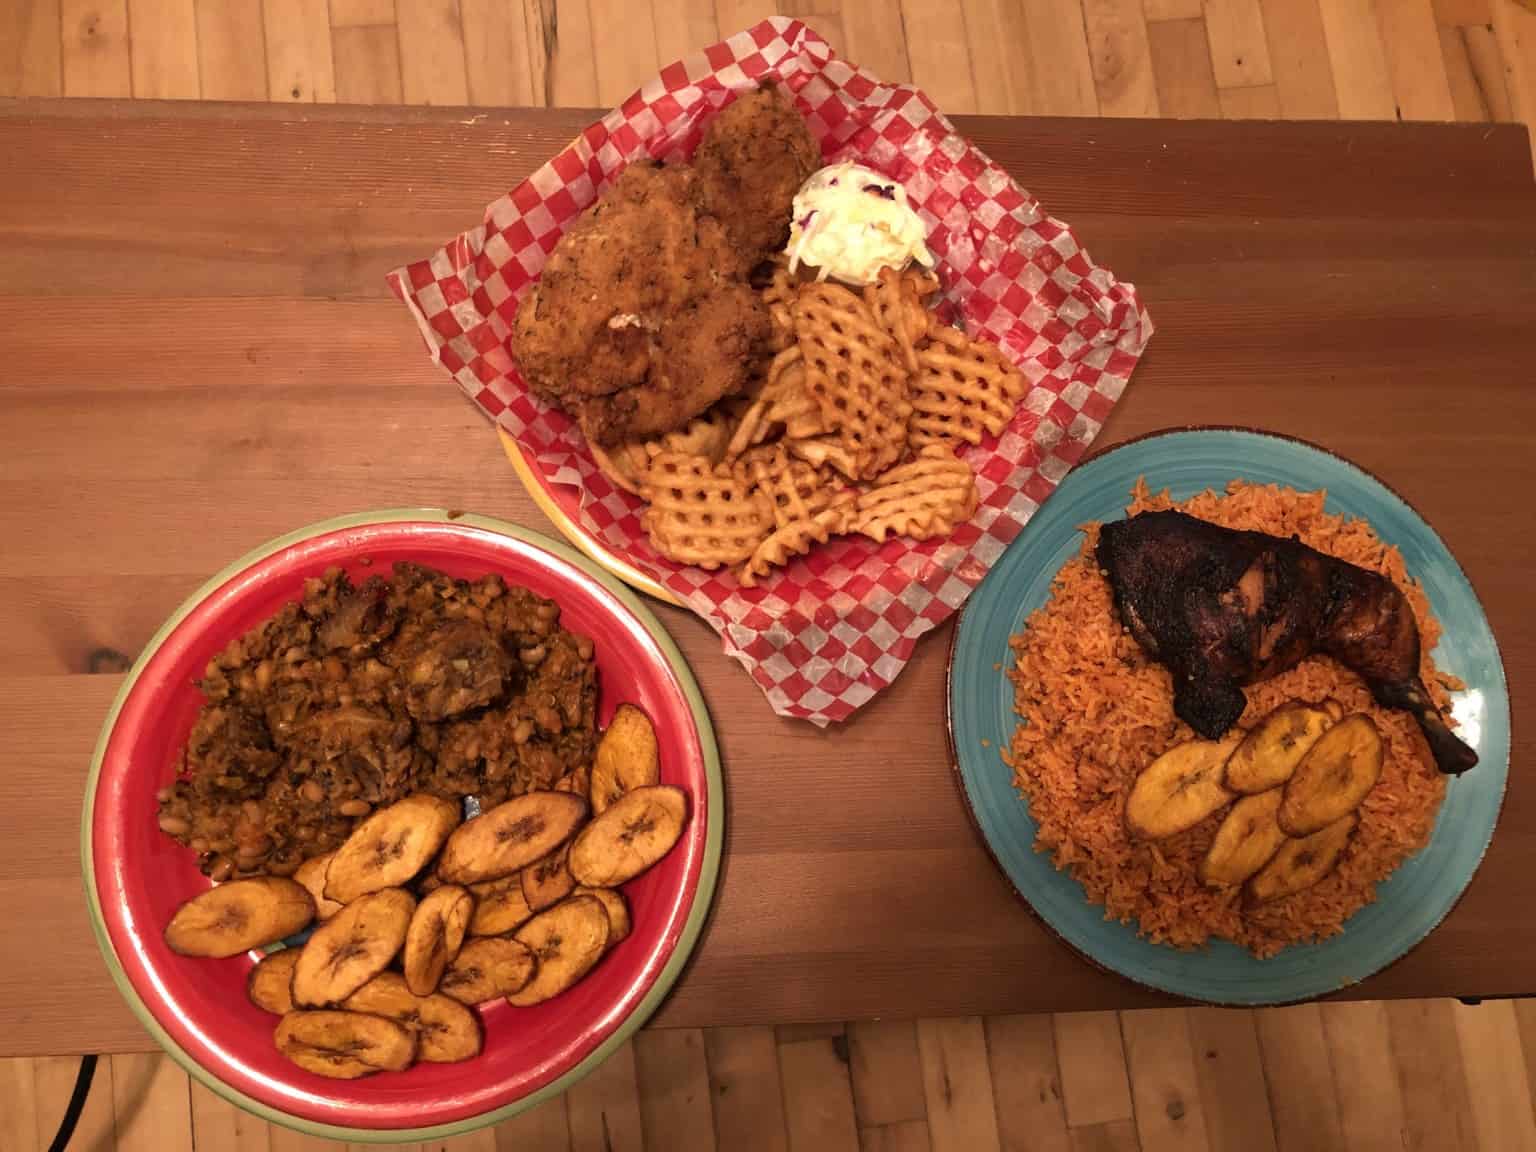 A sample of food from Selasi’s Grill. From left to right: beans and plantains with goat, Annie’s fried chicken, and jollof rice with chicken. | Stephen Strand